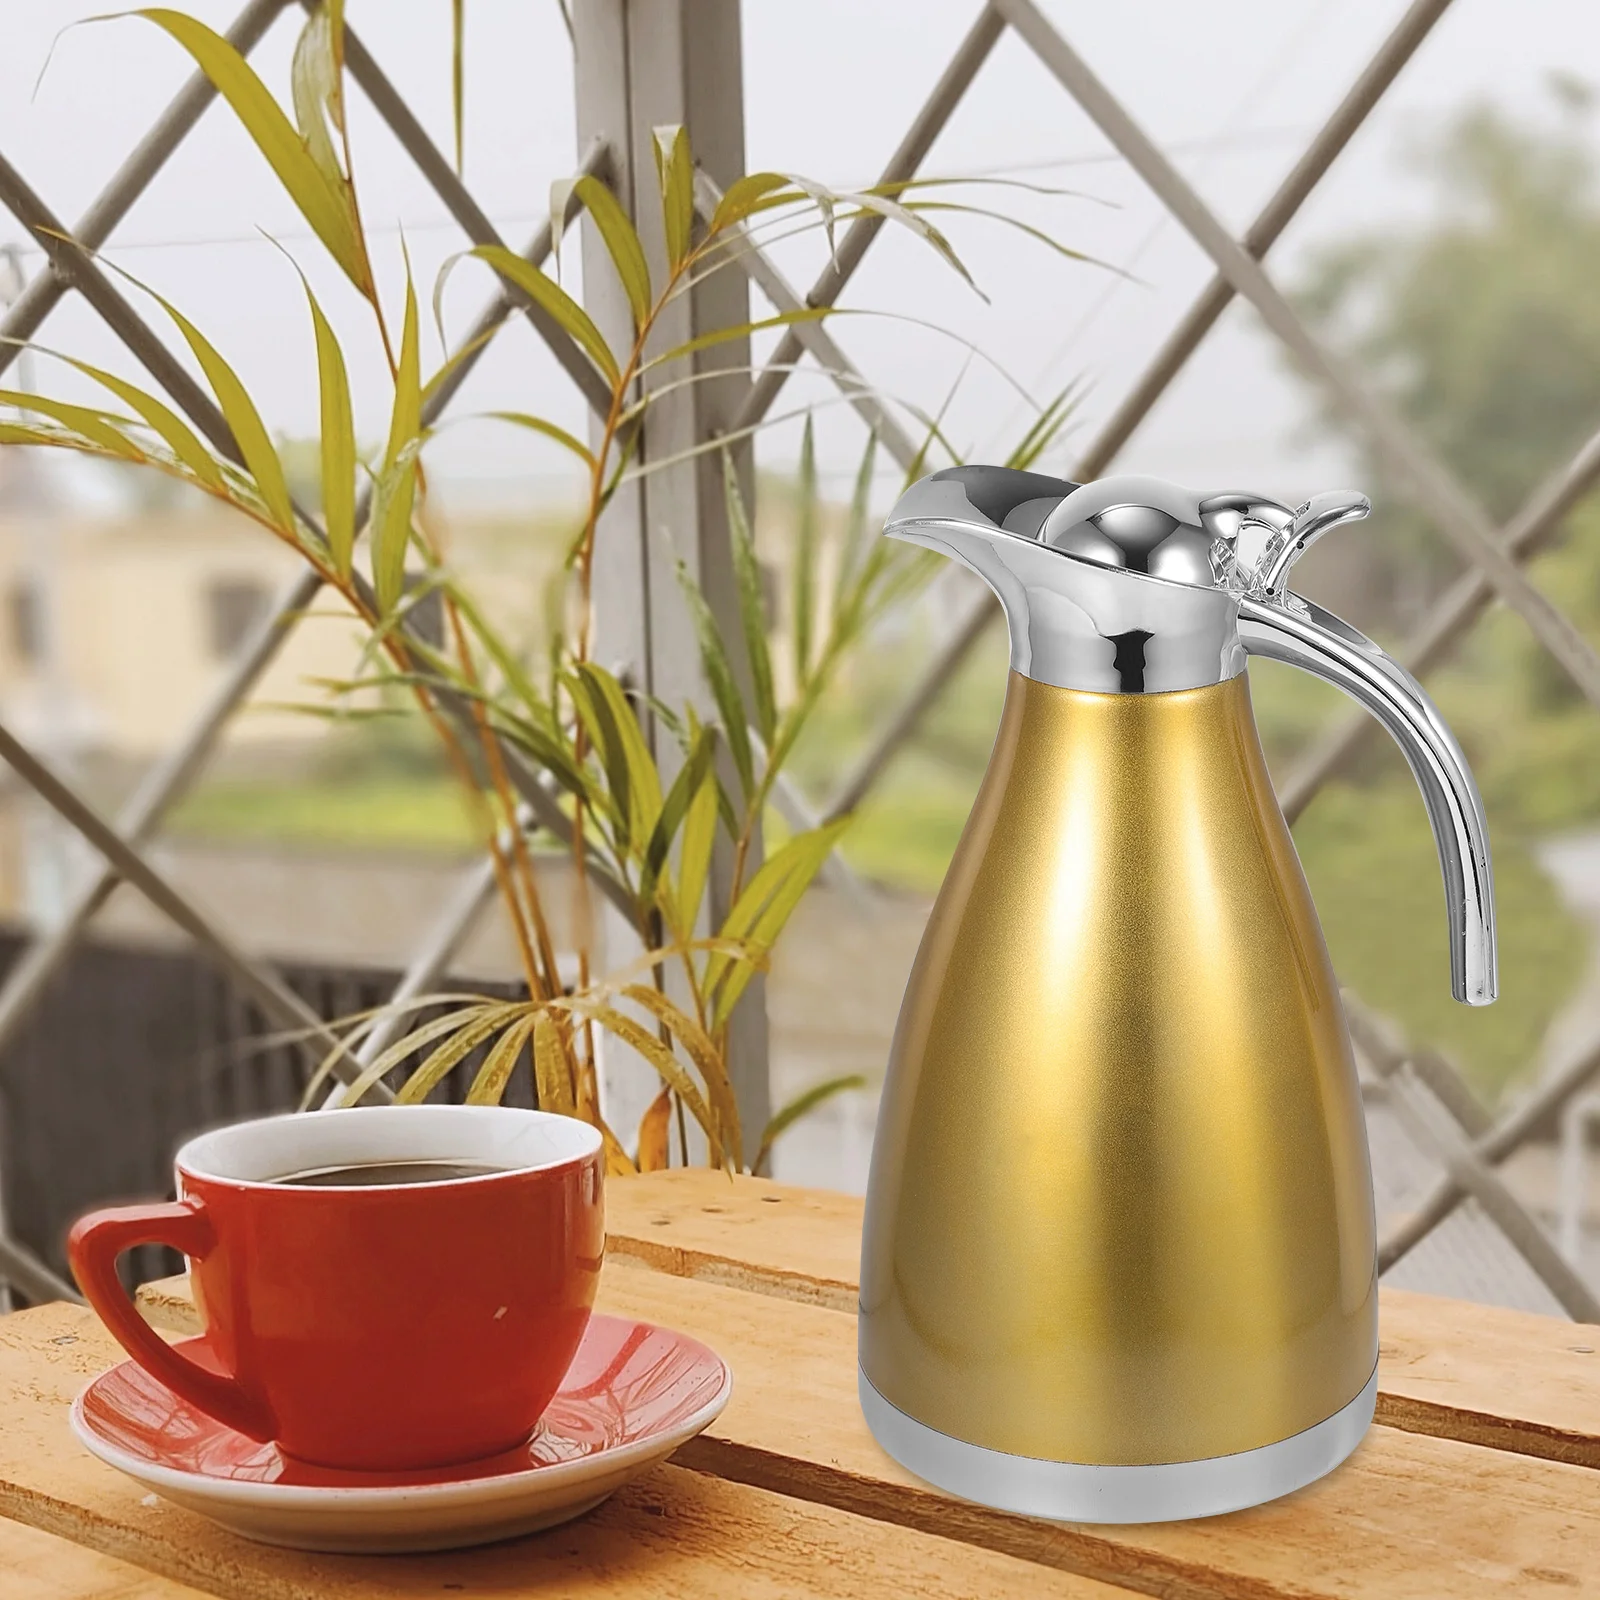 

Thermal Coffee Carafe Stainless Steel Tea Carafe Double Walled Vacuum Flask Insulated Flask Beverage Dispenser Water Kettle Jar